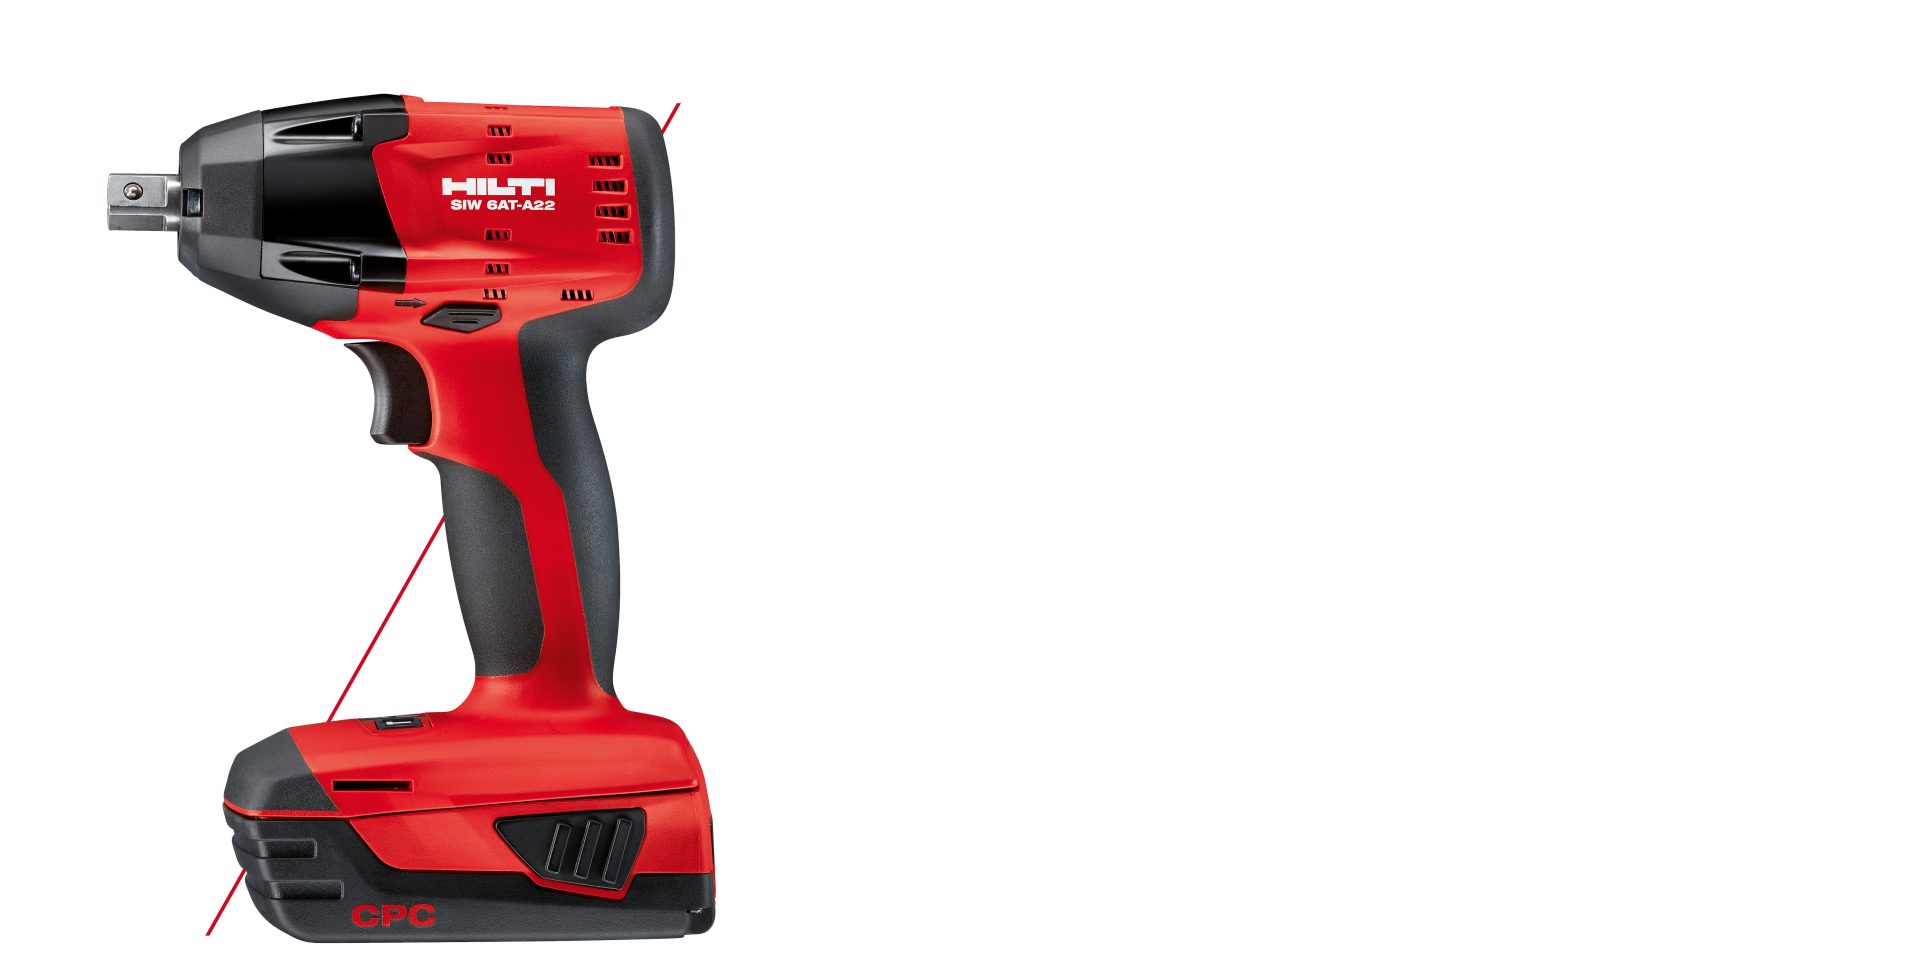 SIW 6AT-A22 cordless impact wrench